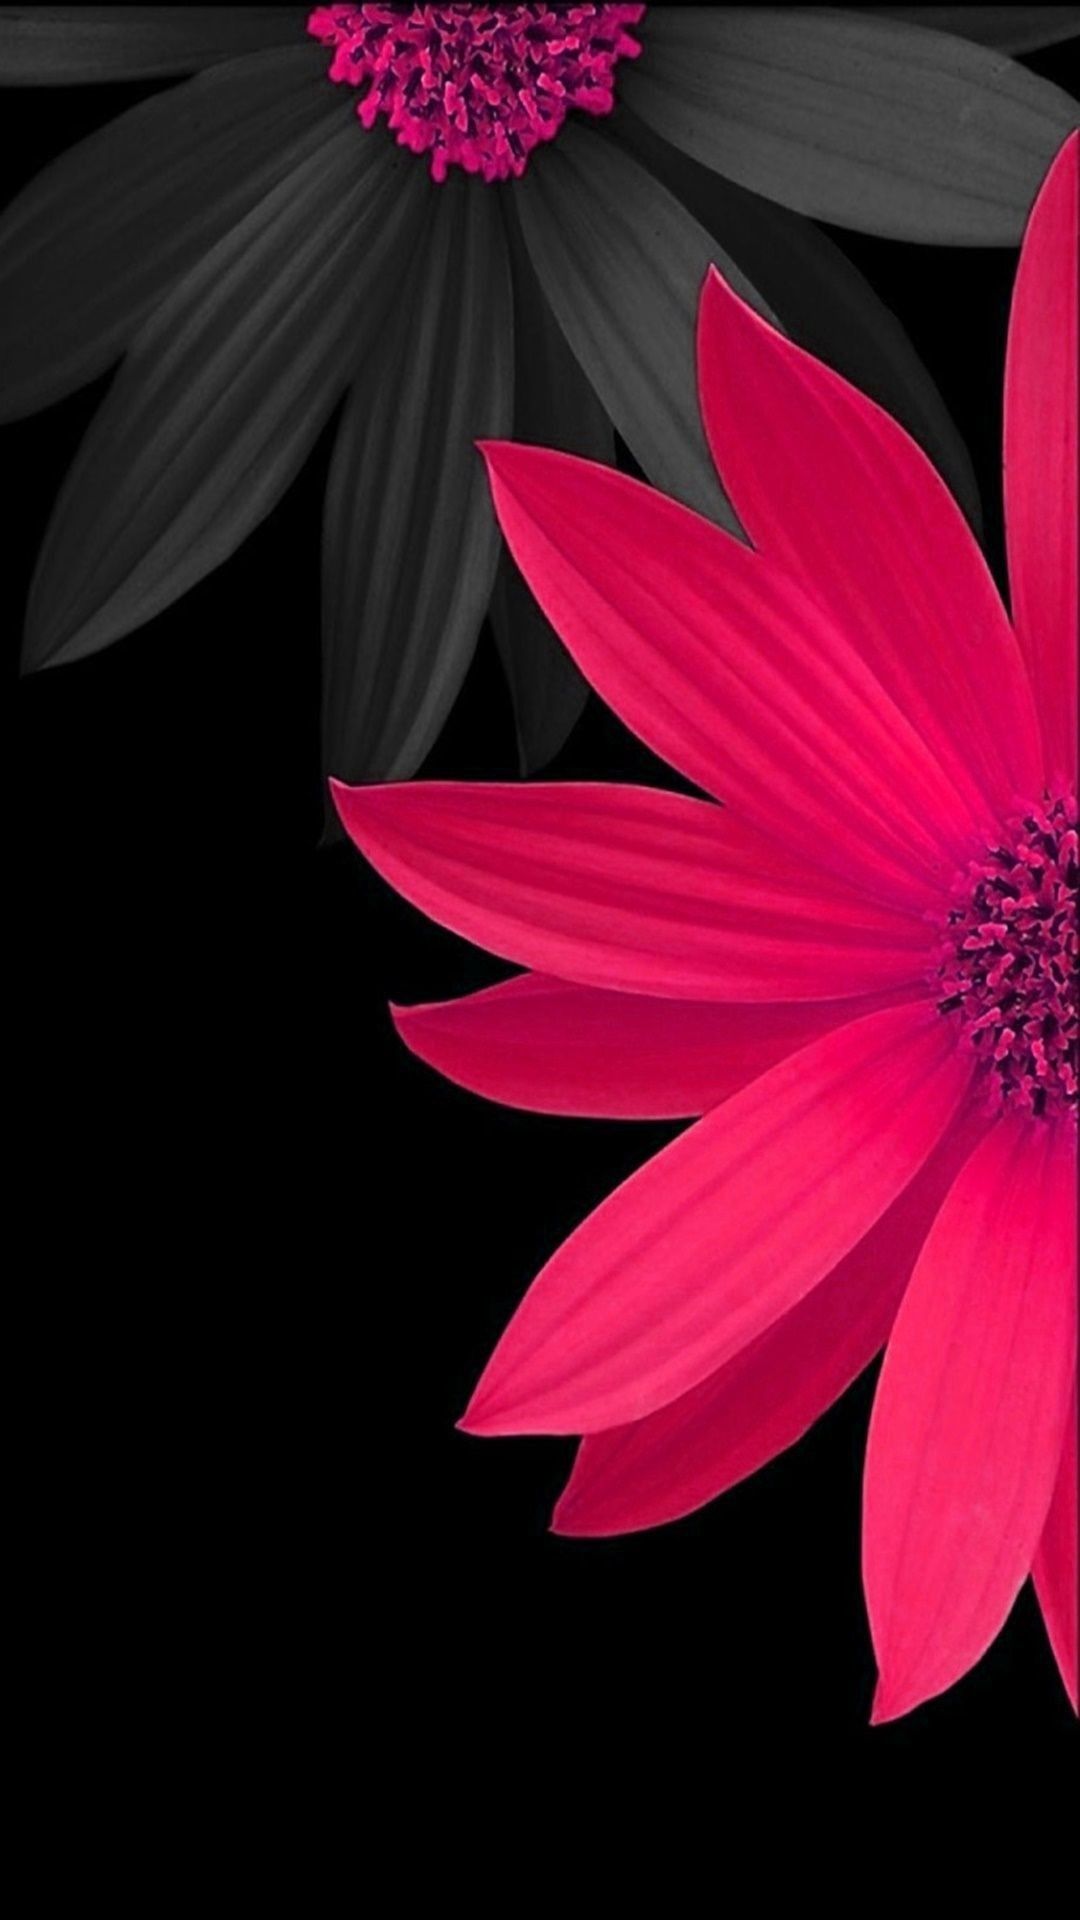 Beautiful Flowers Mobile Wallpapers for Samsung Galaxy  rwallpapers   Flower mobile Cellphone wallpaper Mobile wallpaper